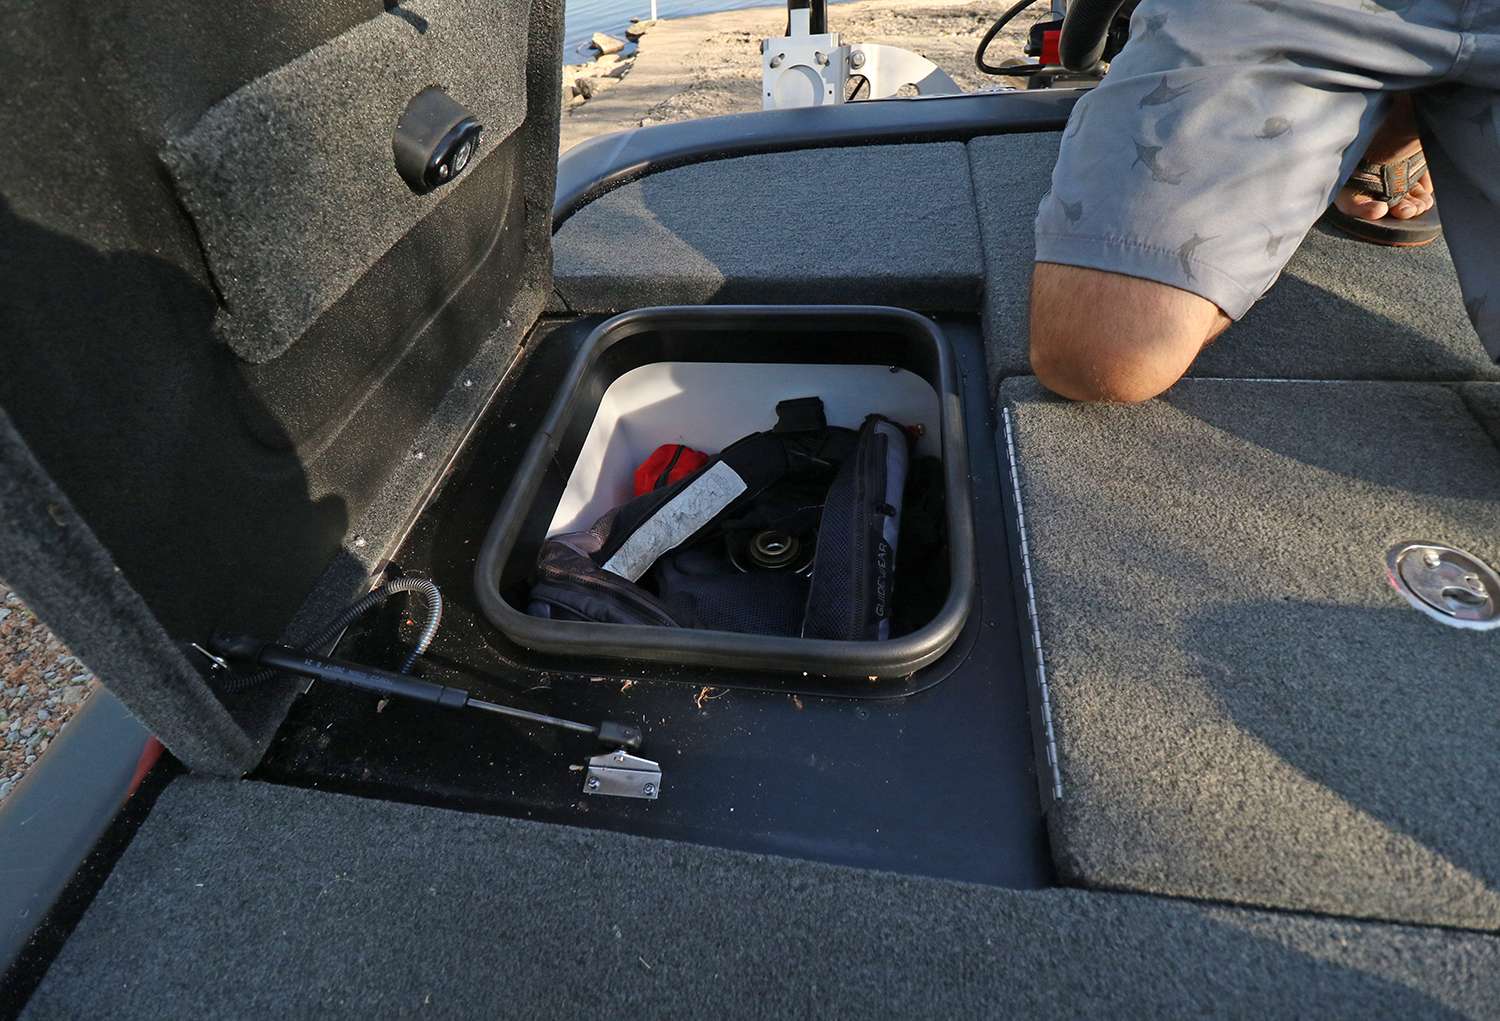 Behind the driver's seat is a storage box worth looking into.